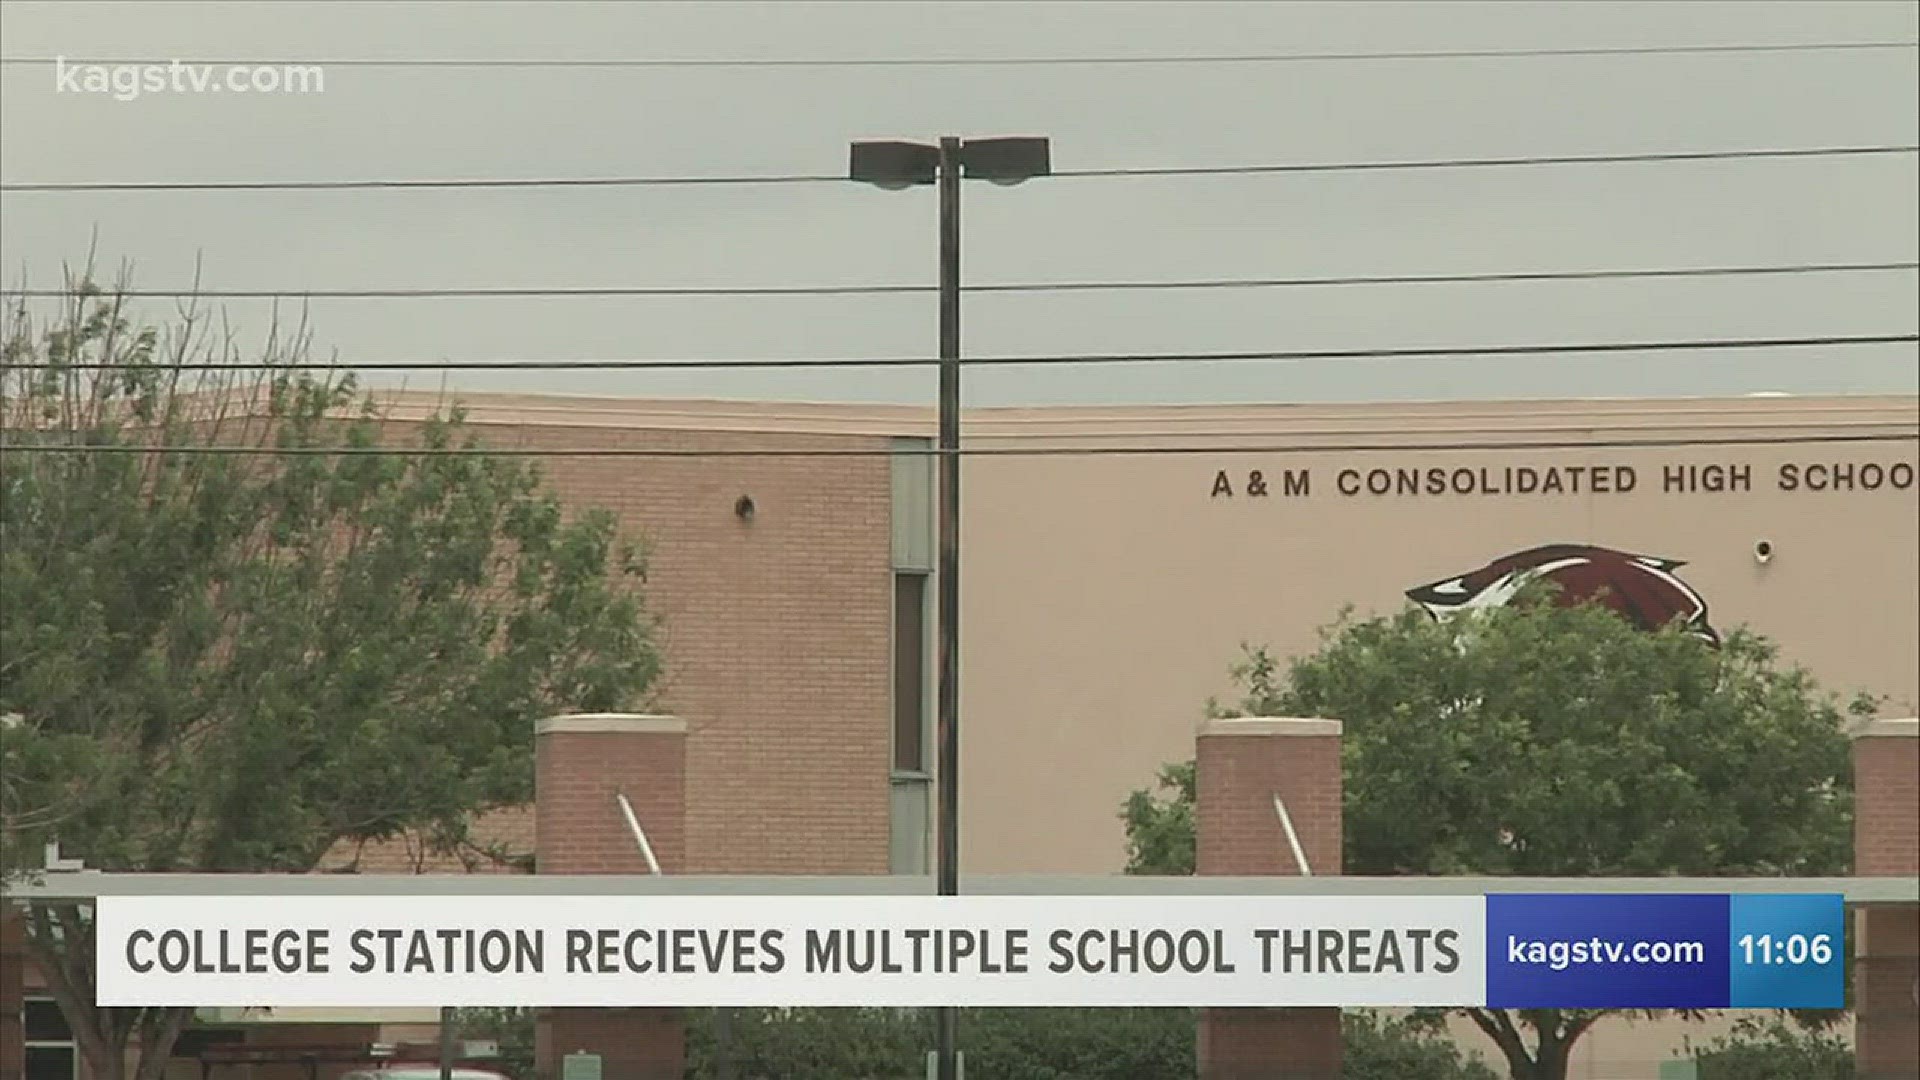 College Station ISD has received multiple reports of threats to a school since the Parkland High School shooting last week. In addition, two students have been arrested due to those threats.